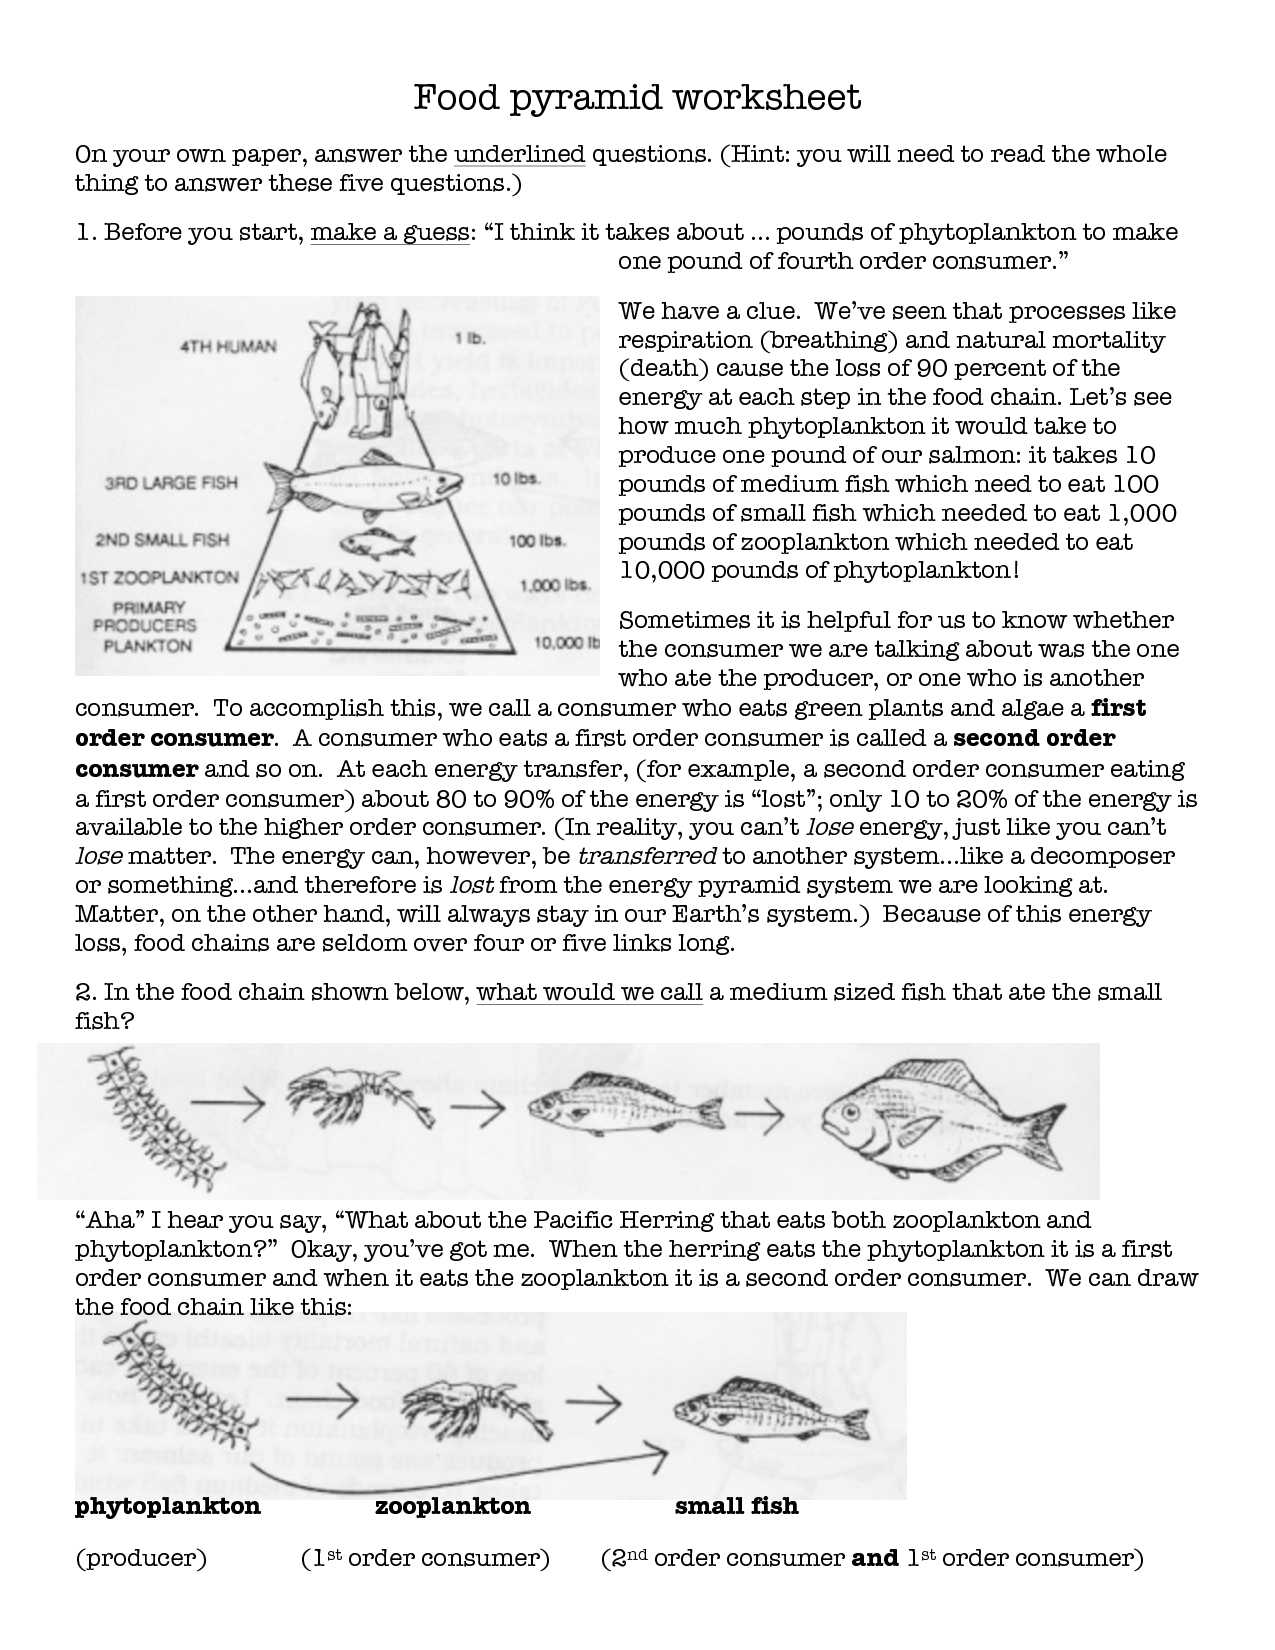 Food Web Worksheet Answers together with attractive Food Web Worksheet Th Grade Science Worksheets Energy